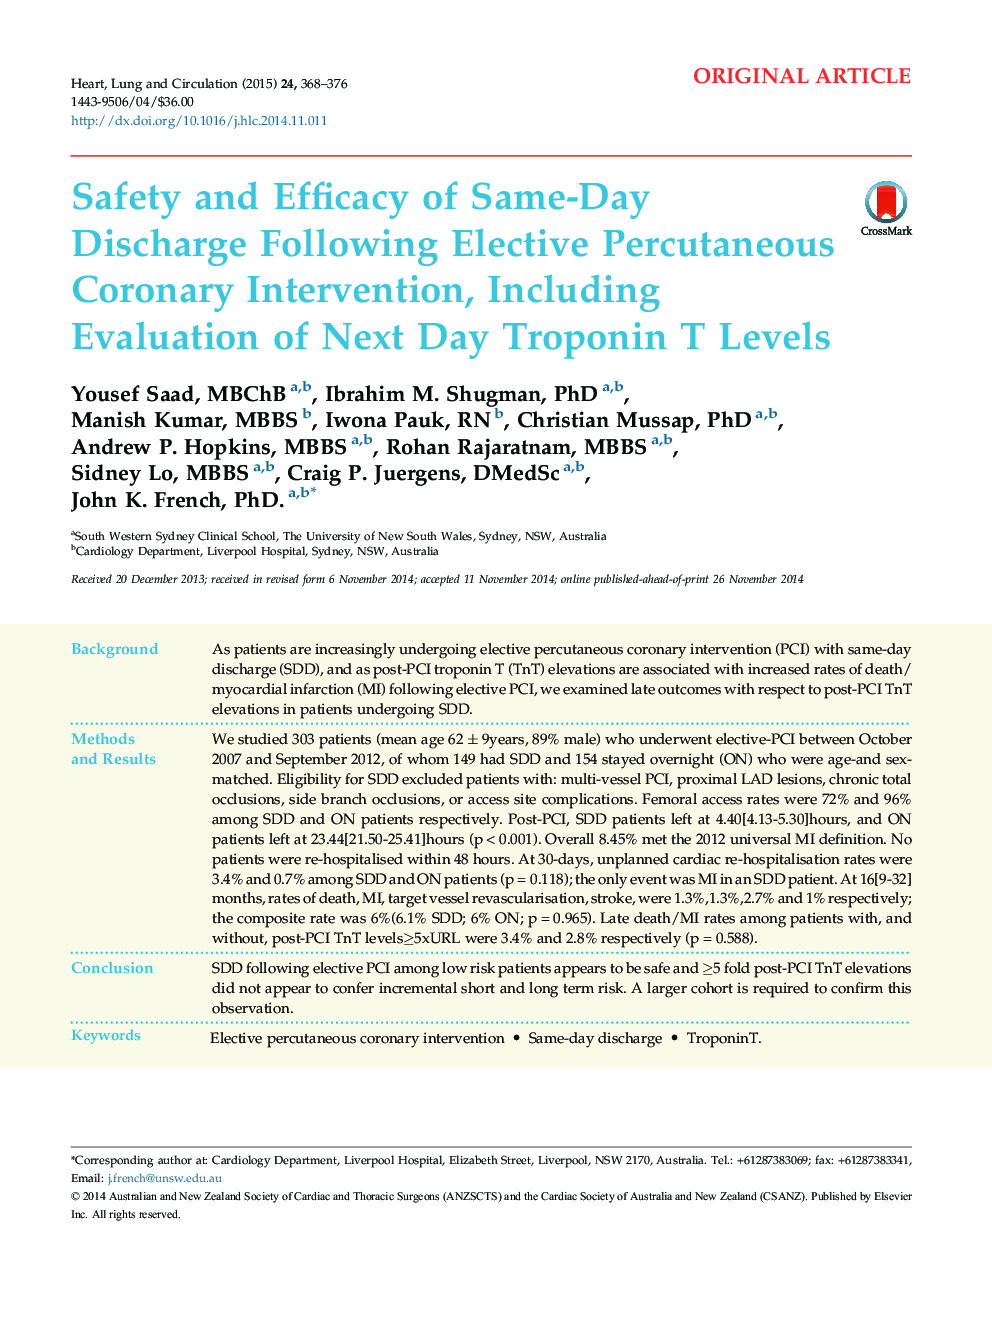 Safety and Efficacy of Same-Day Discharge Following Elective Percutaneous Coronary Intervention, Including Evaluation of Next Day Troponin T Levels